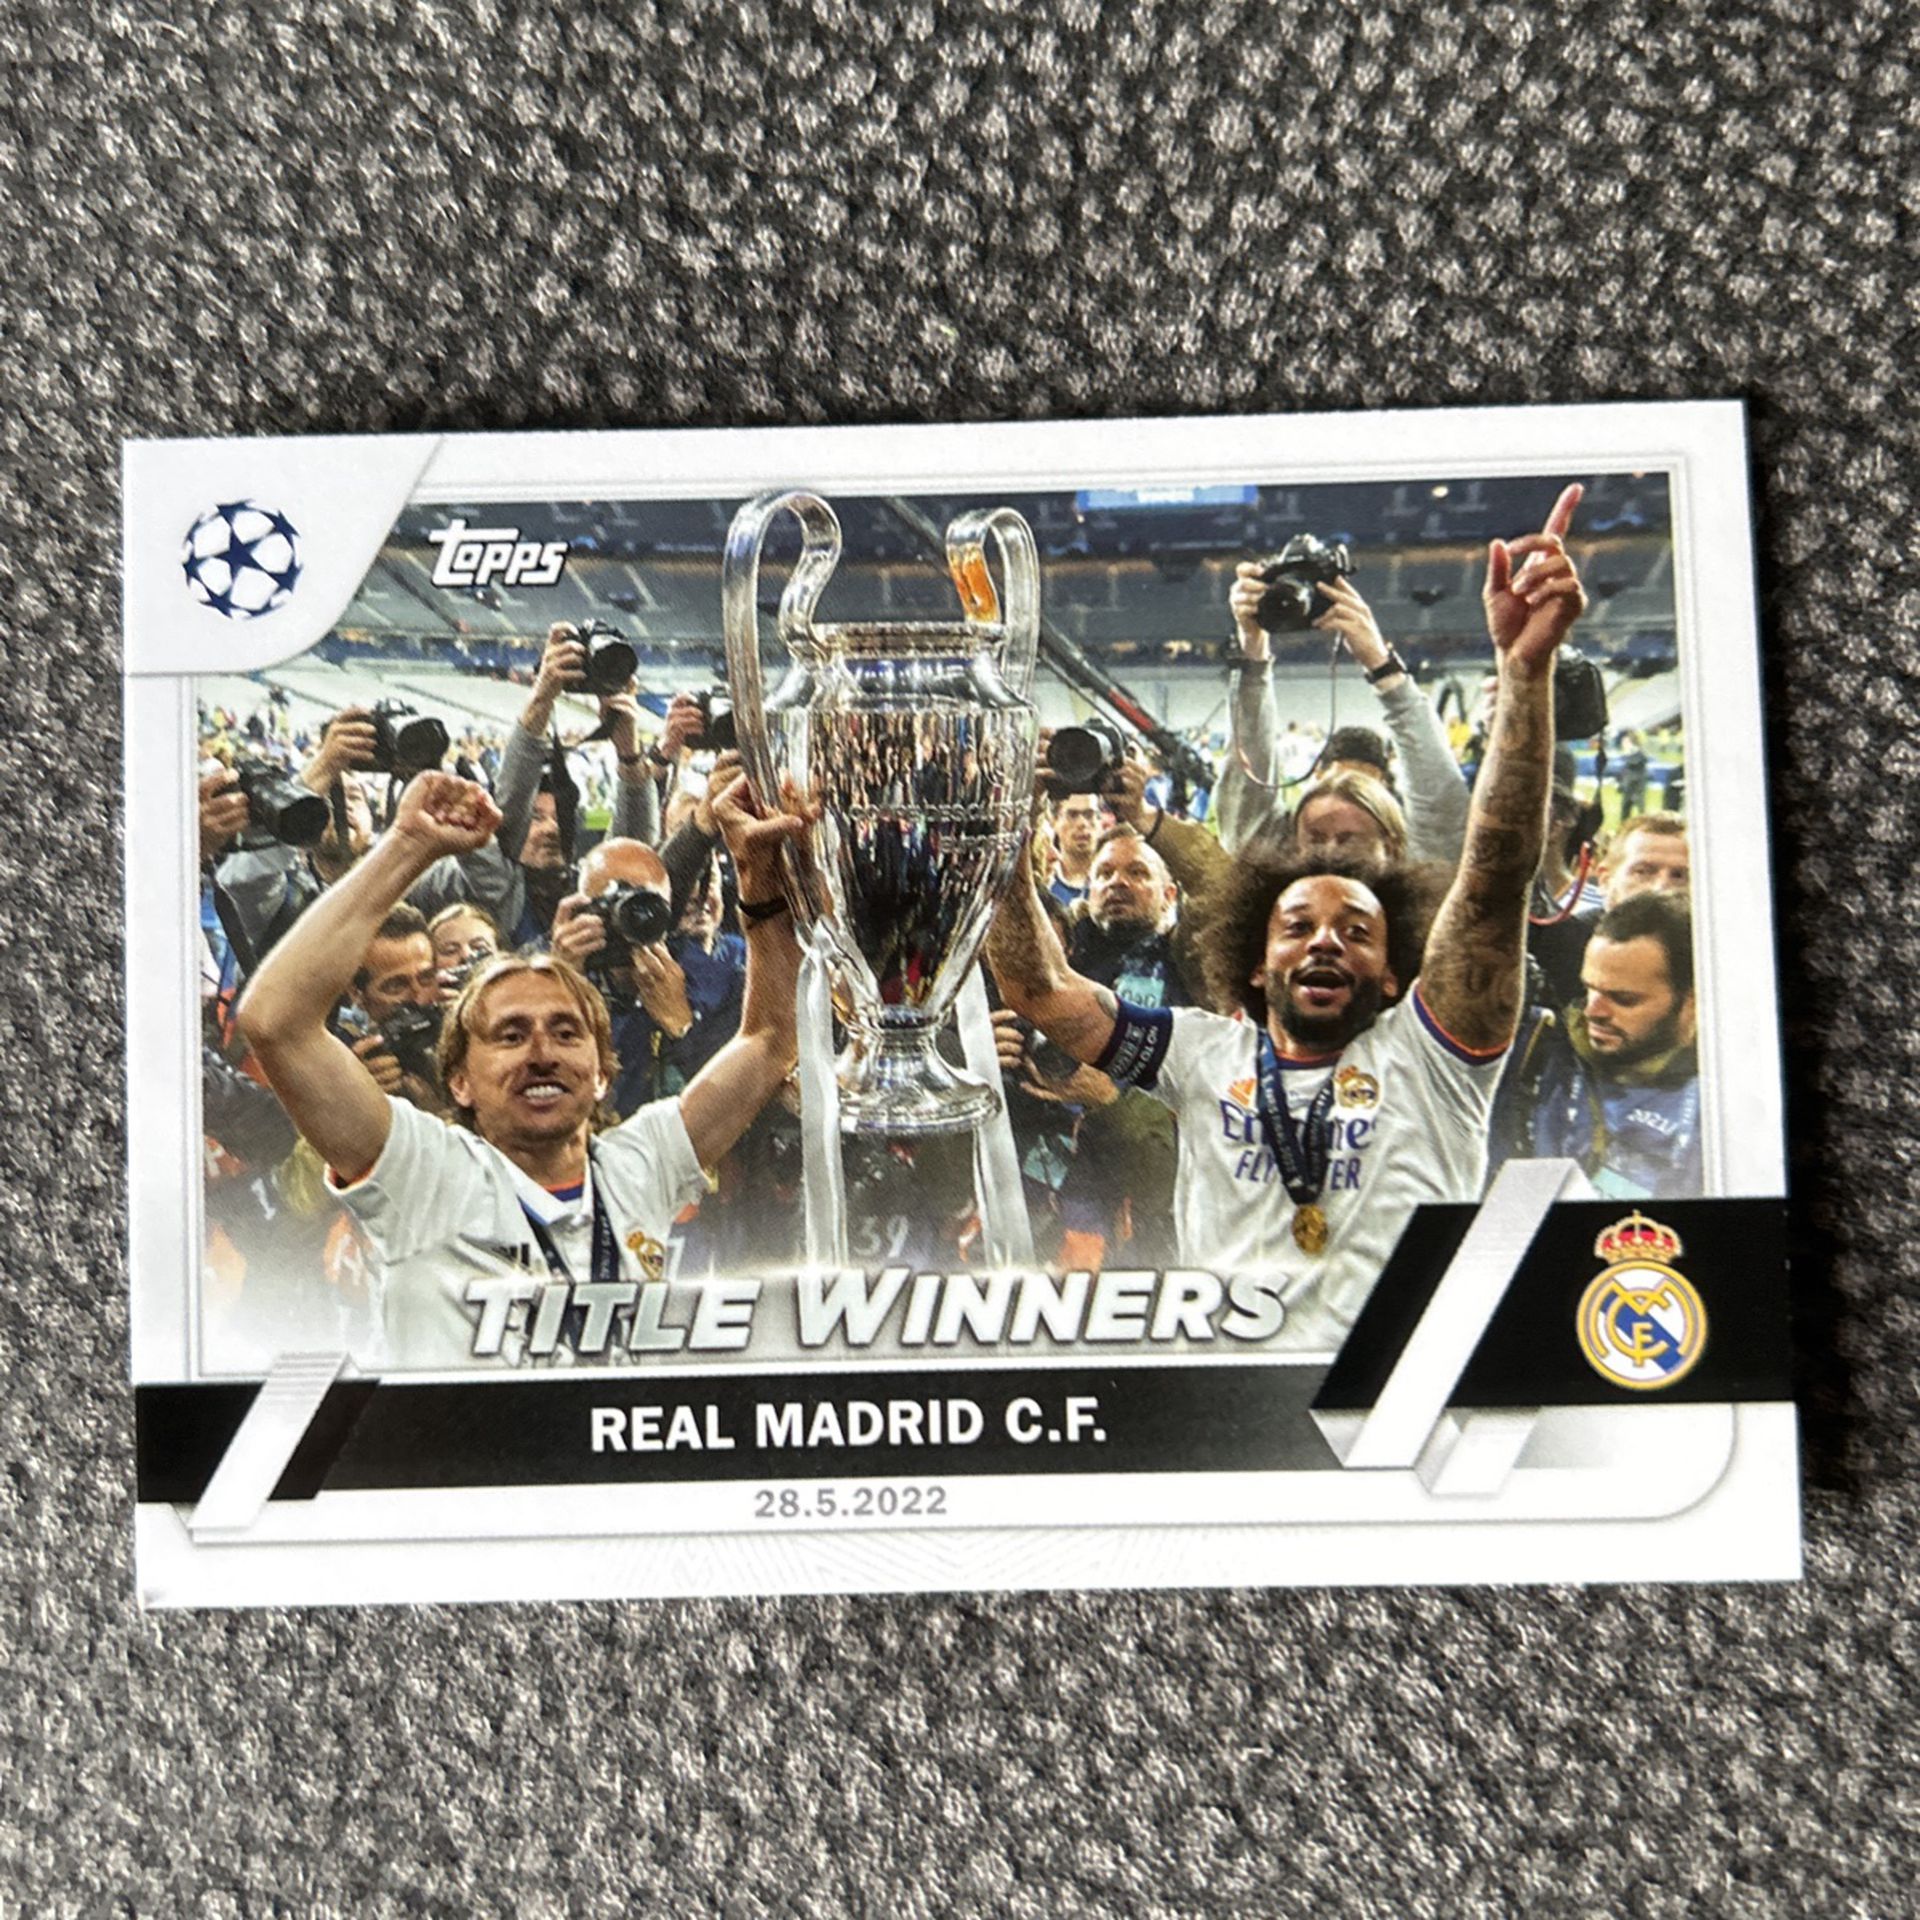 Title Winners Real Madrid C.f. Topps